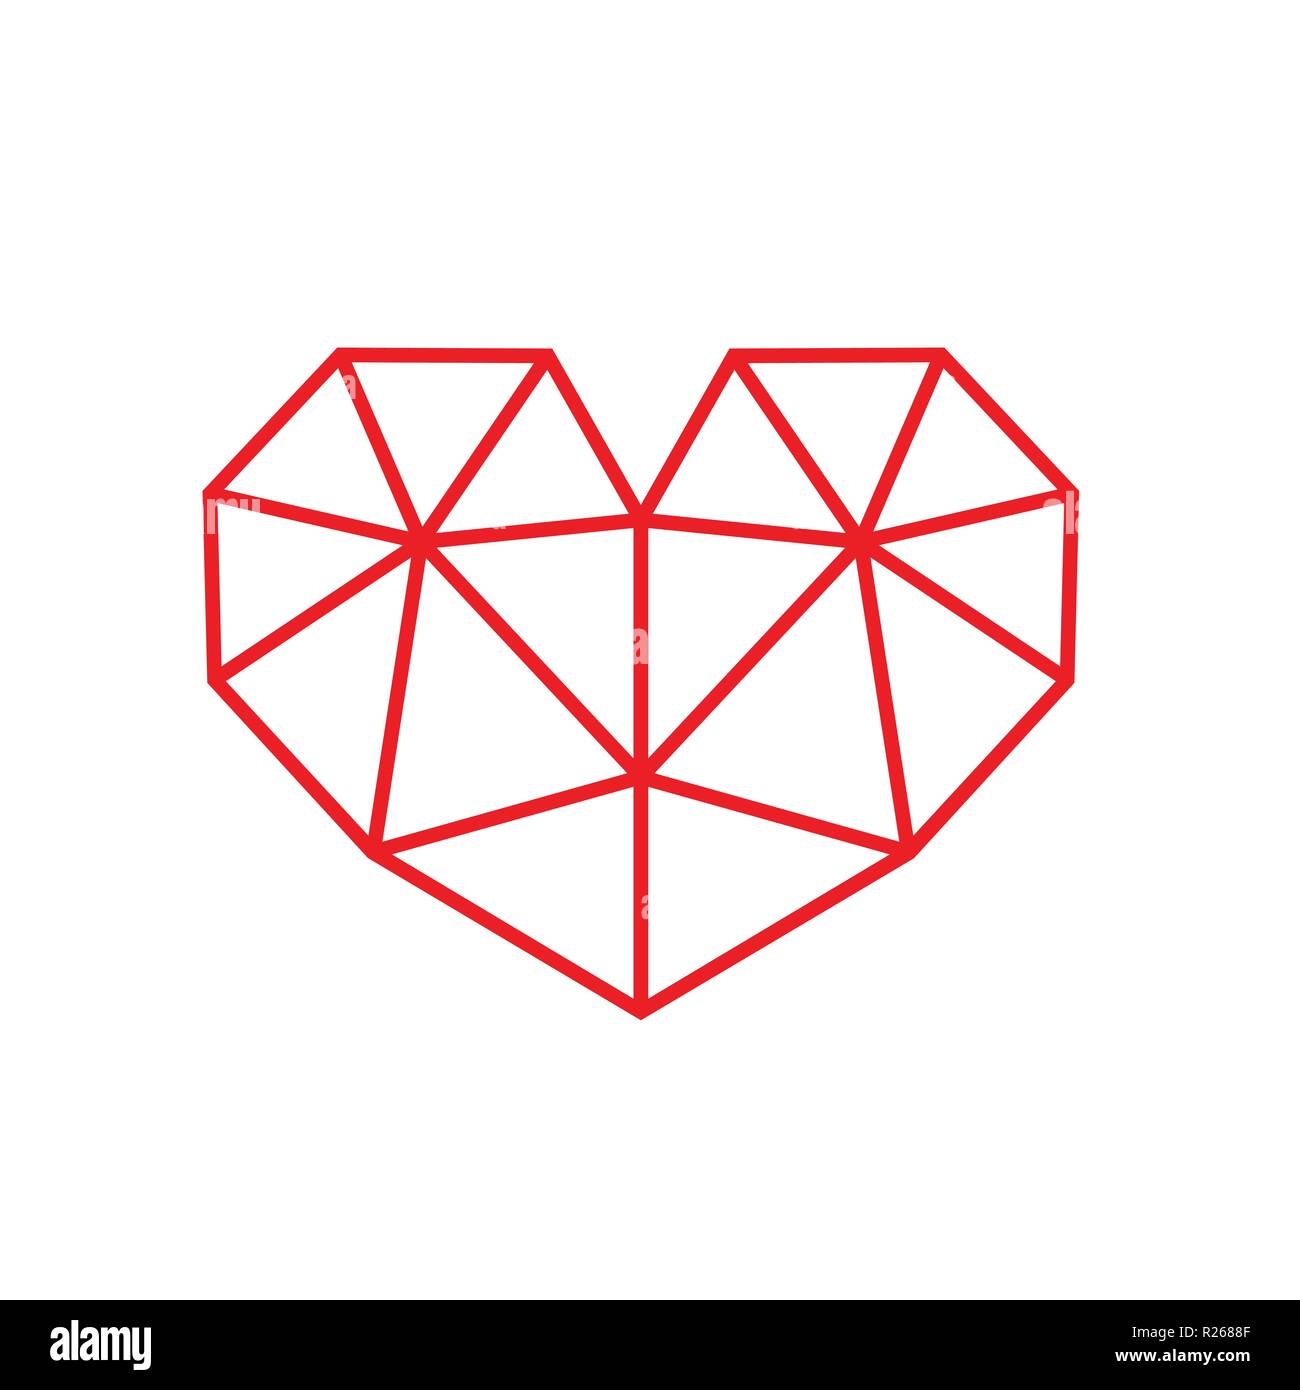 Red Triangular Style Heart Symbol. Available in resizable EPS vector format. Isolated on white background. Stock Vector